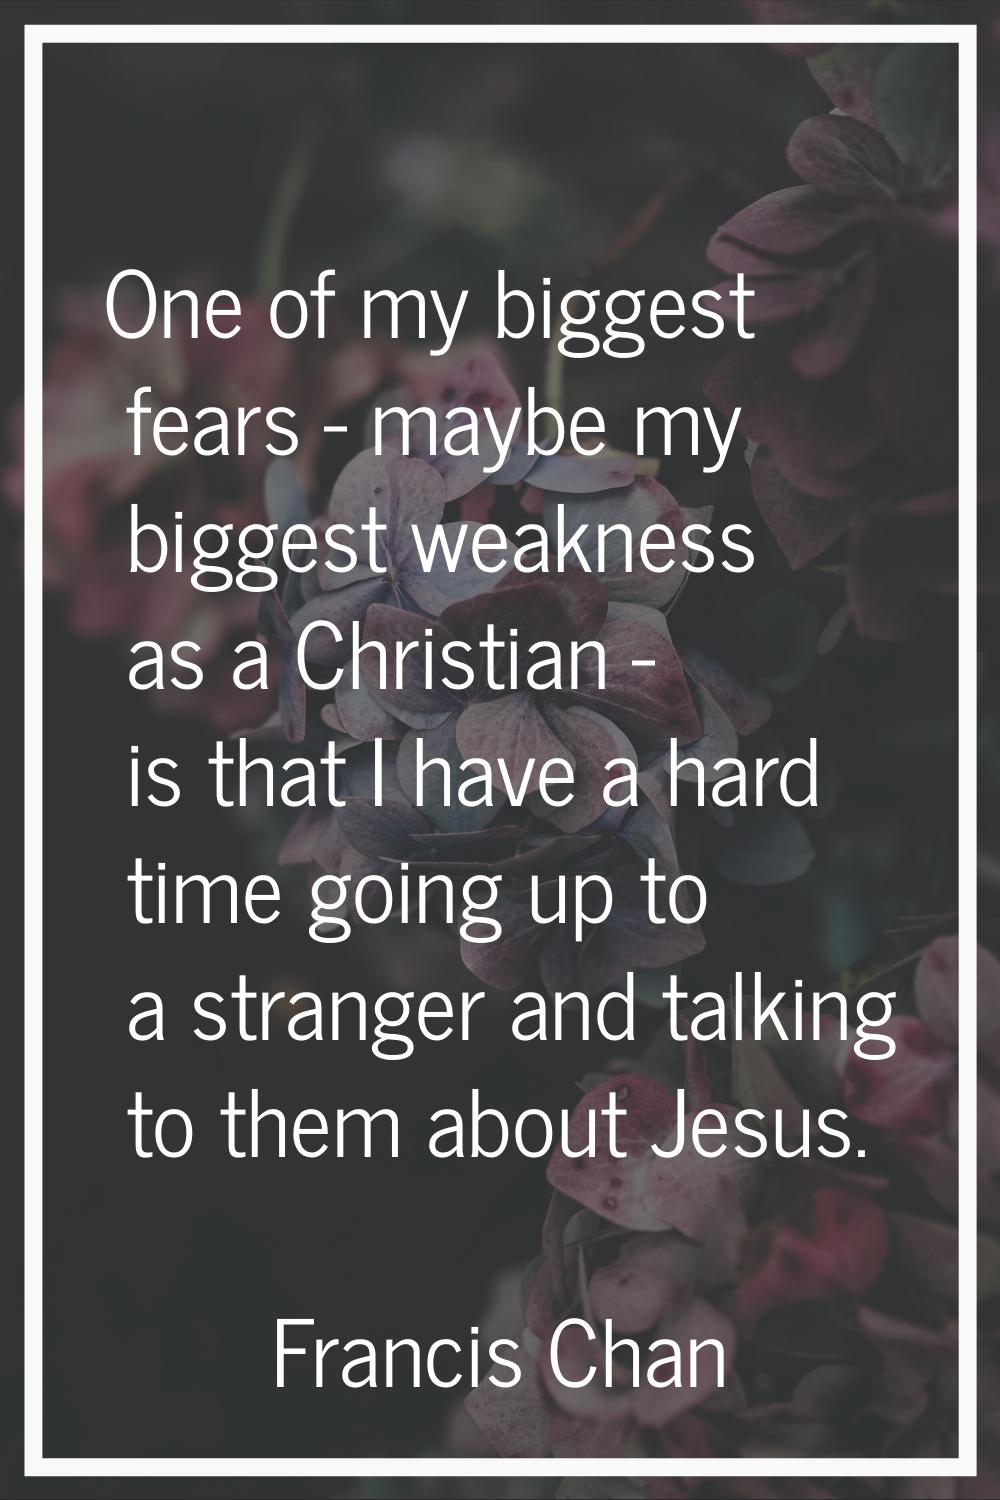 One of my biggest fears - maybe my biggest weakness as a Christian - is that I have a hard time goi